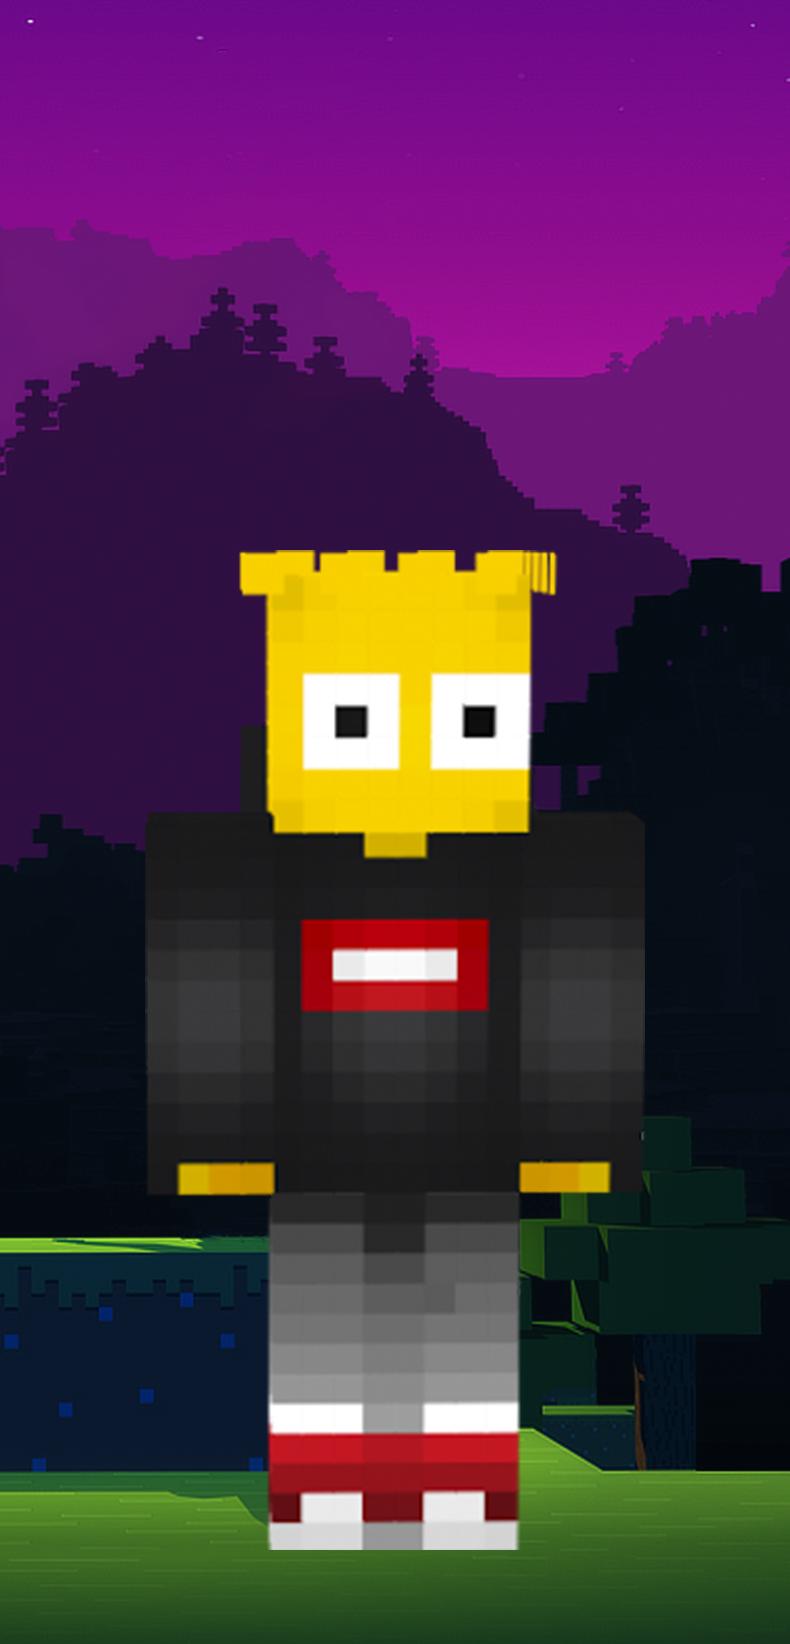 Simpsons Skin for Minecraft for Android - APK Download